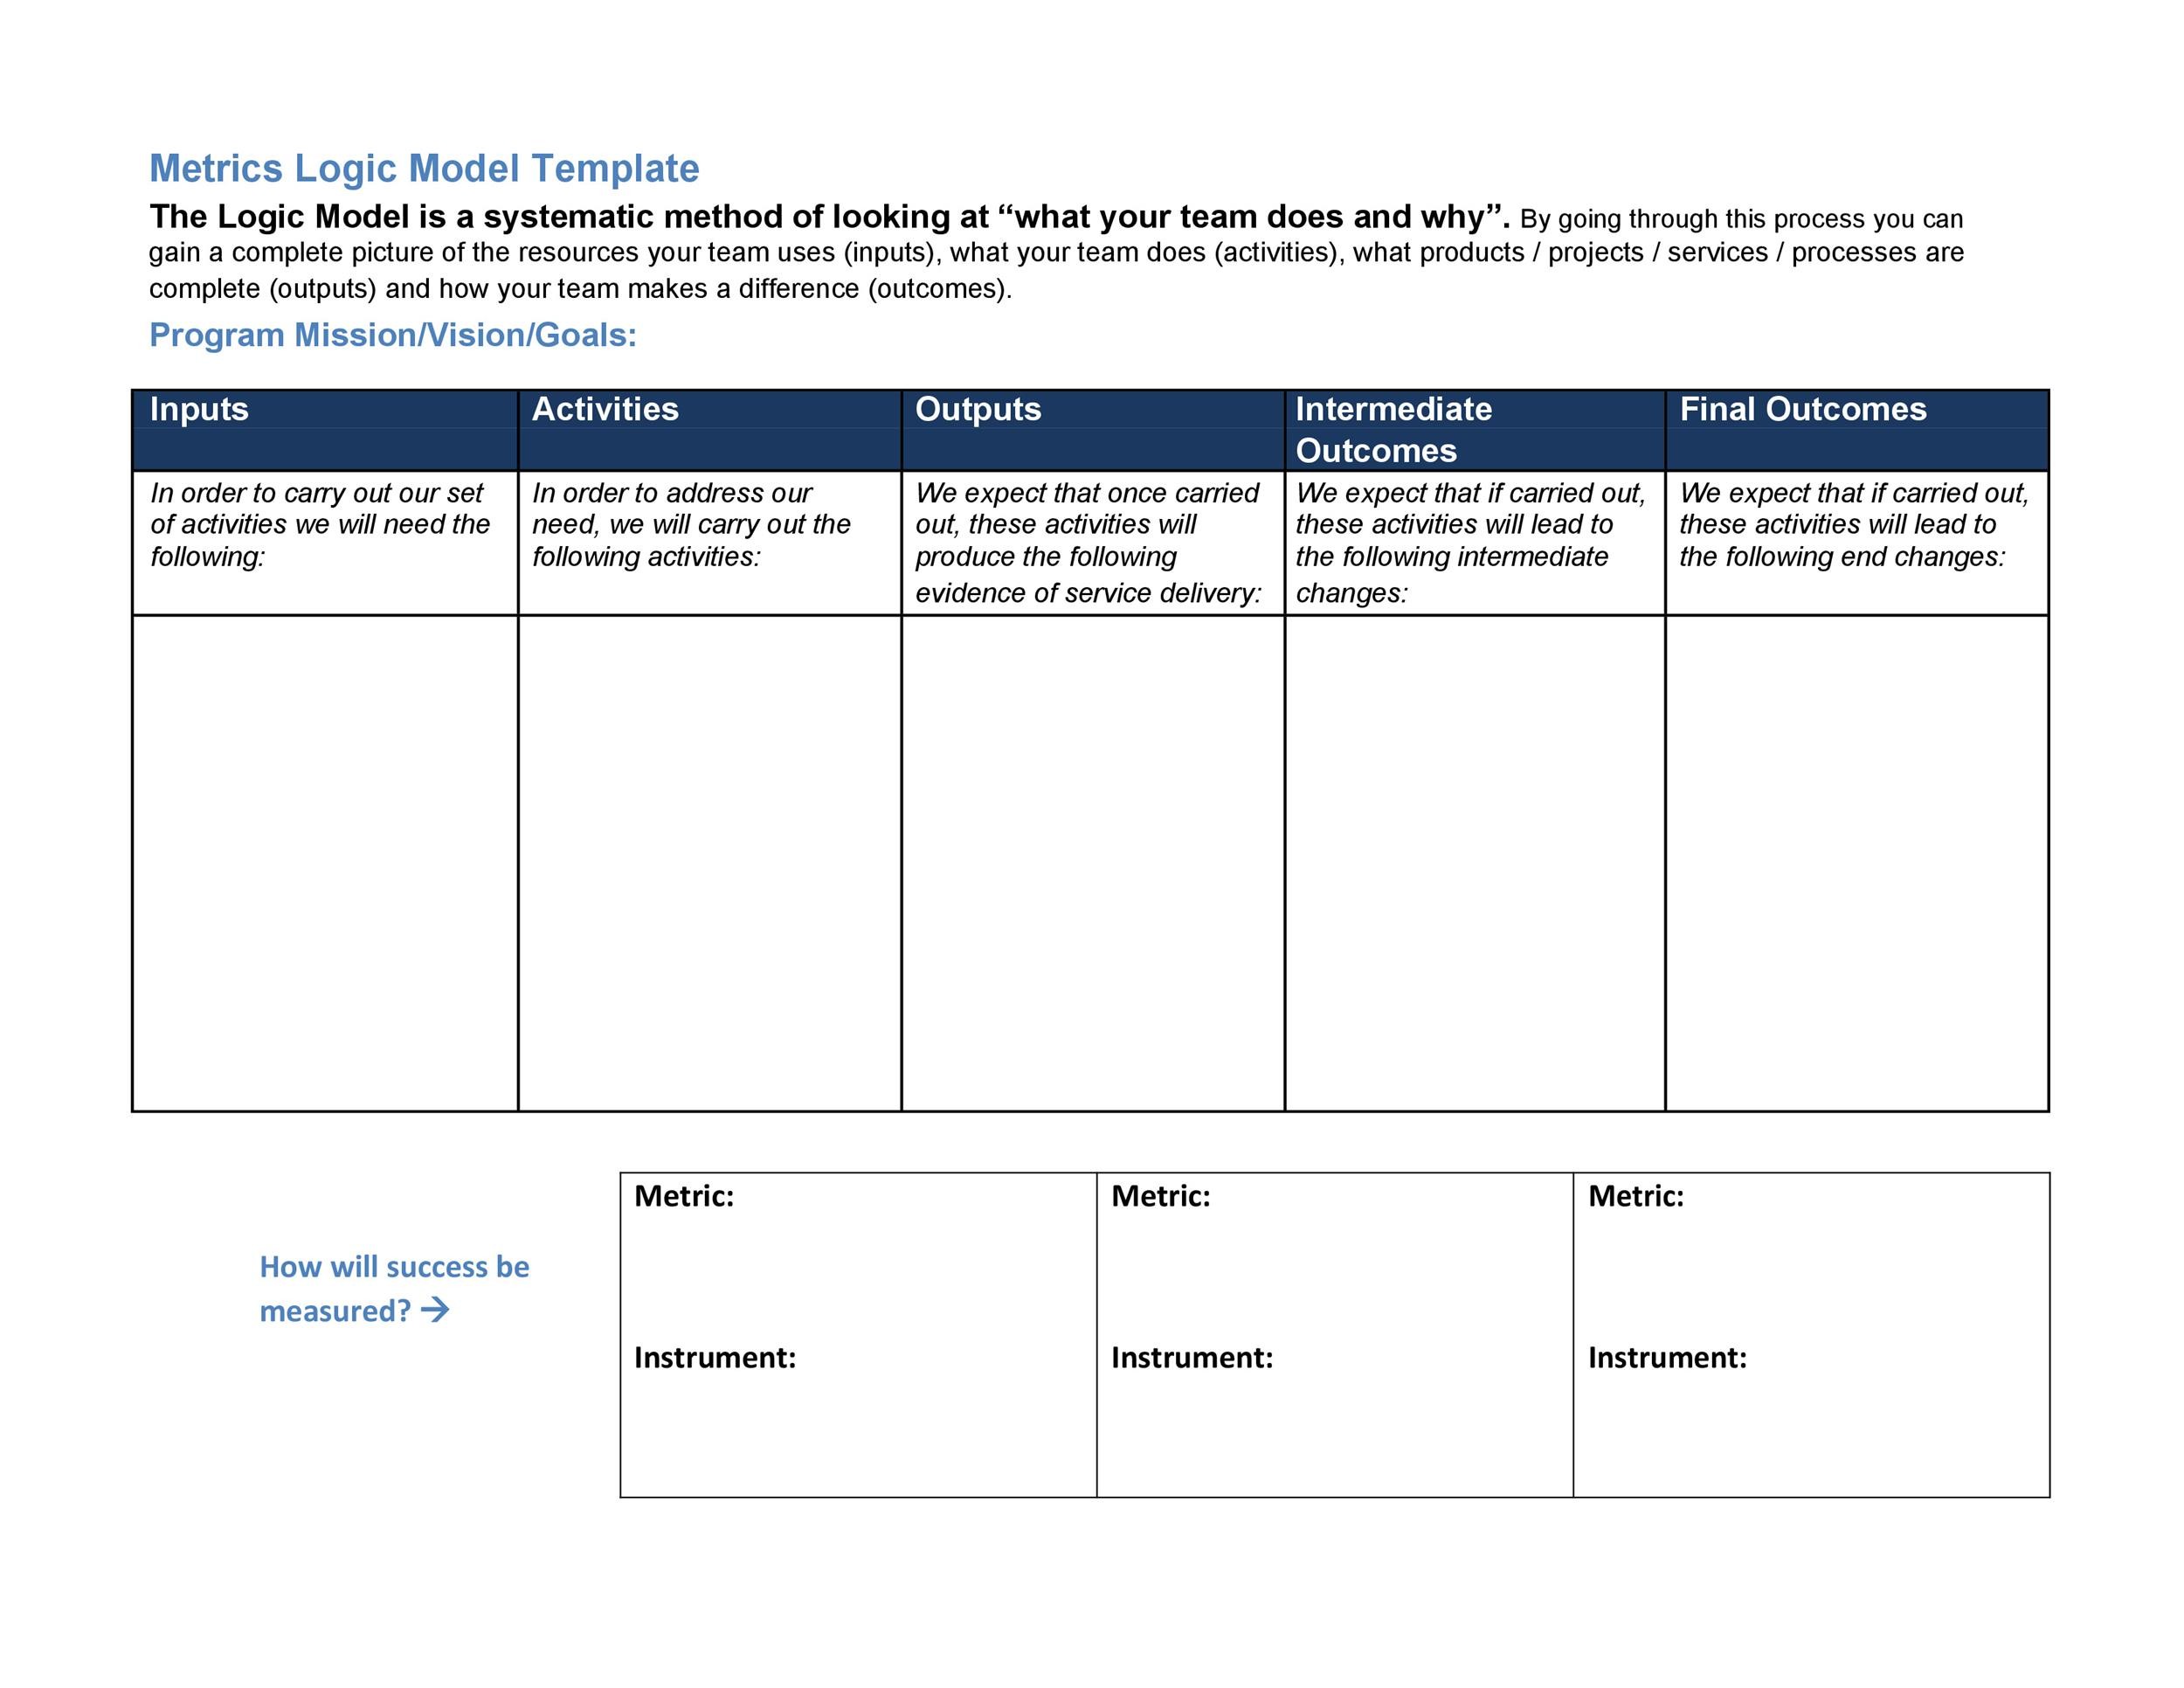 More than 40 Logic Model Templates & Examples ᐅ TemplateLab